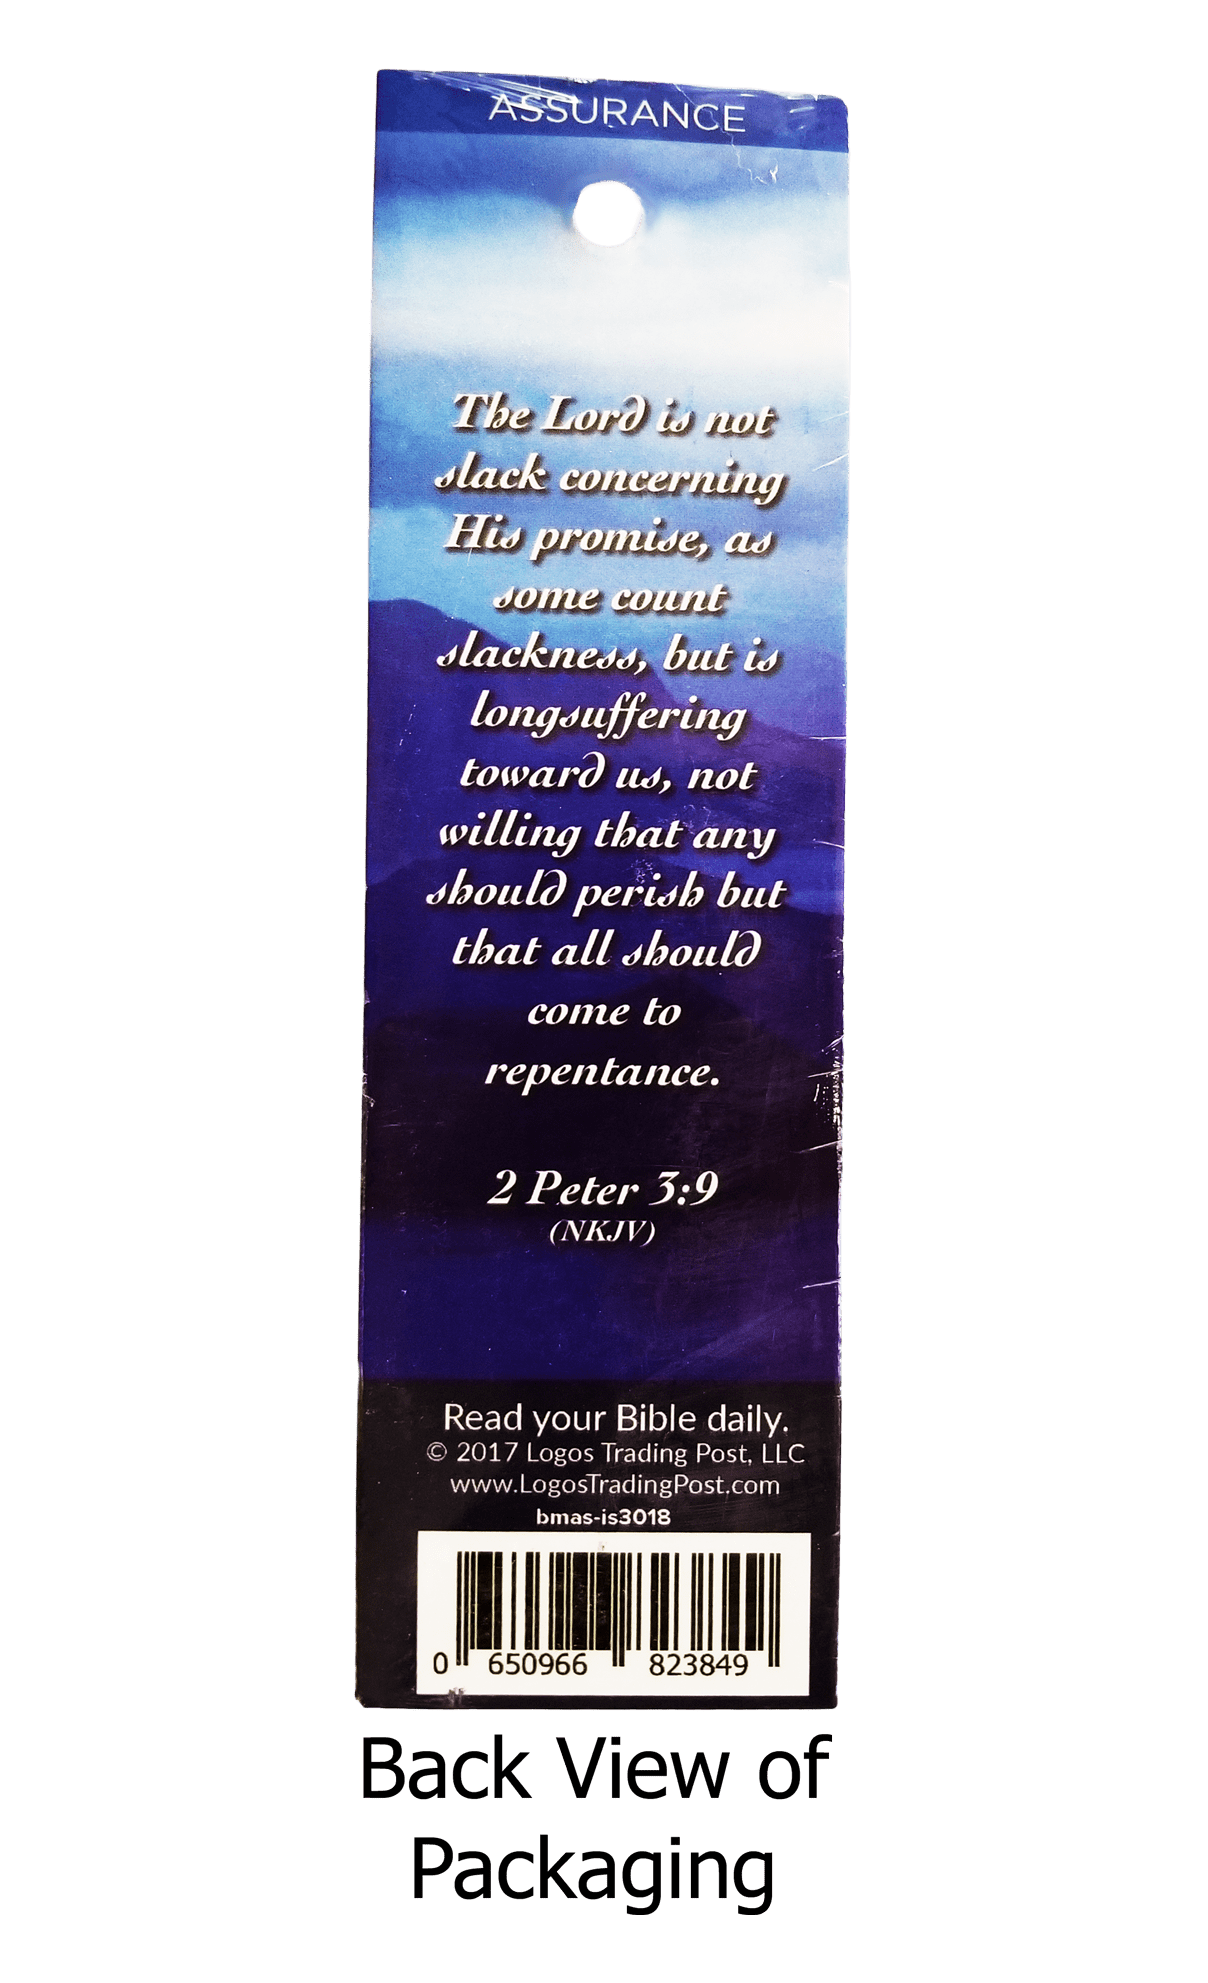 The Lord Longs to Be Gracious to You Bookmarks, Pack of 25- Christian Bookmarks